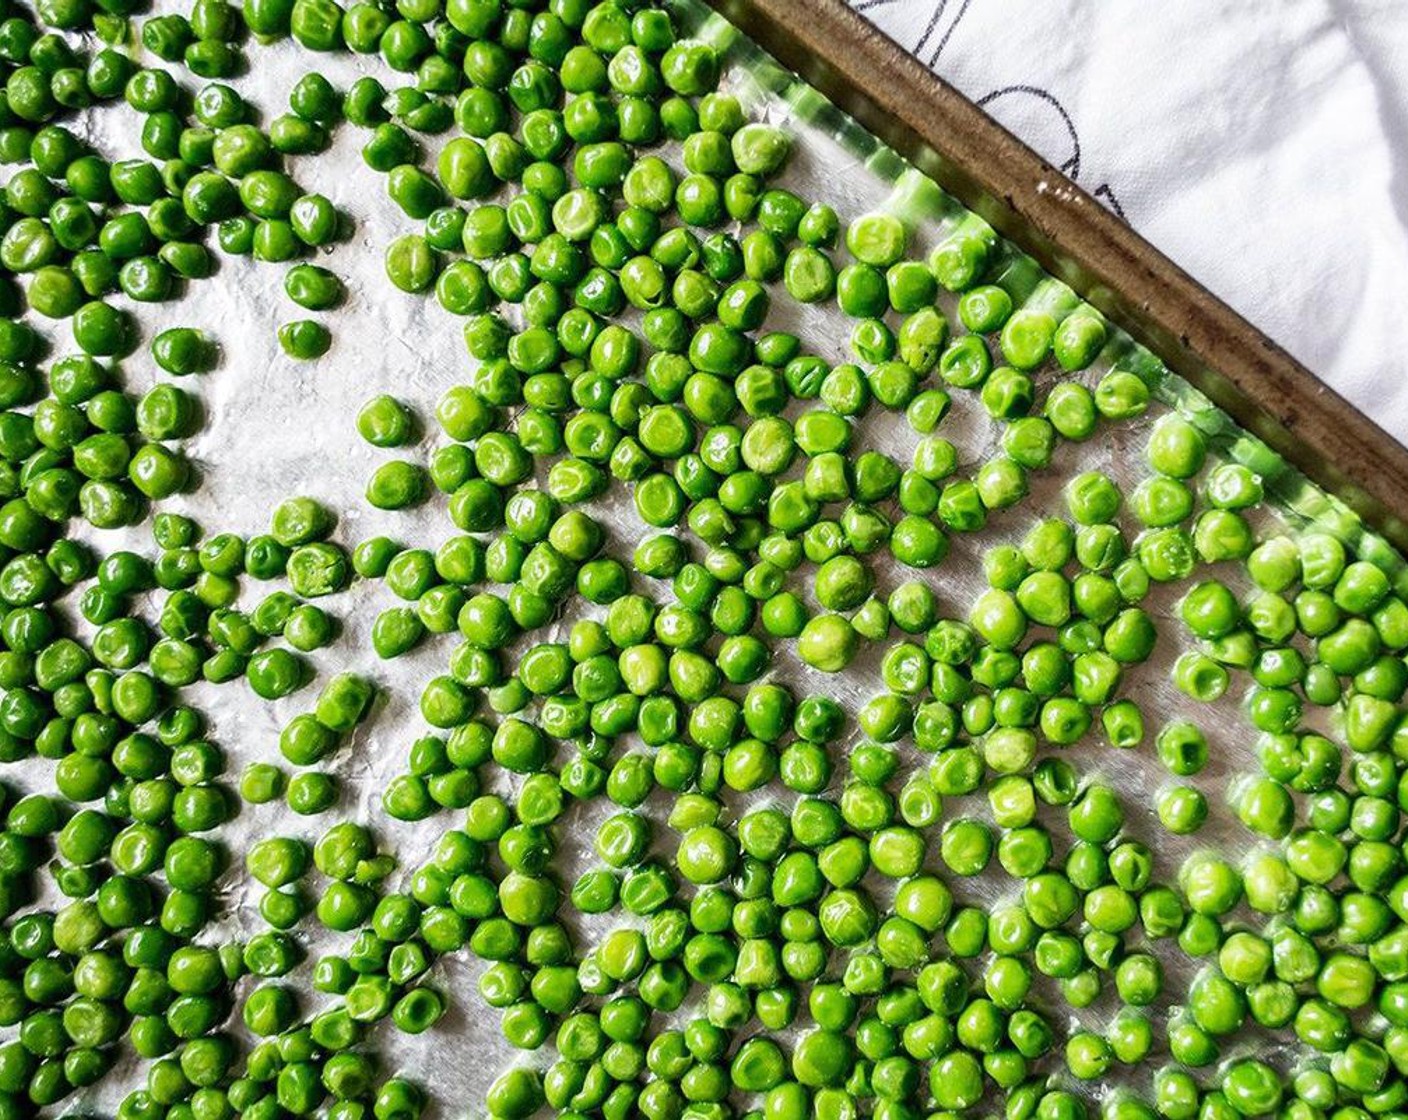 step 2 Spread Frozen Green Peas (1 bag) in single layer on large baking dish and thoroughly blot with clean paper towel to remove as much moisture as possible.